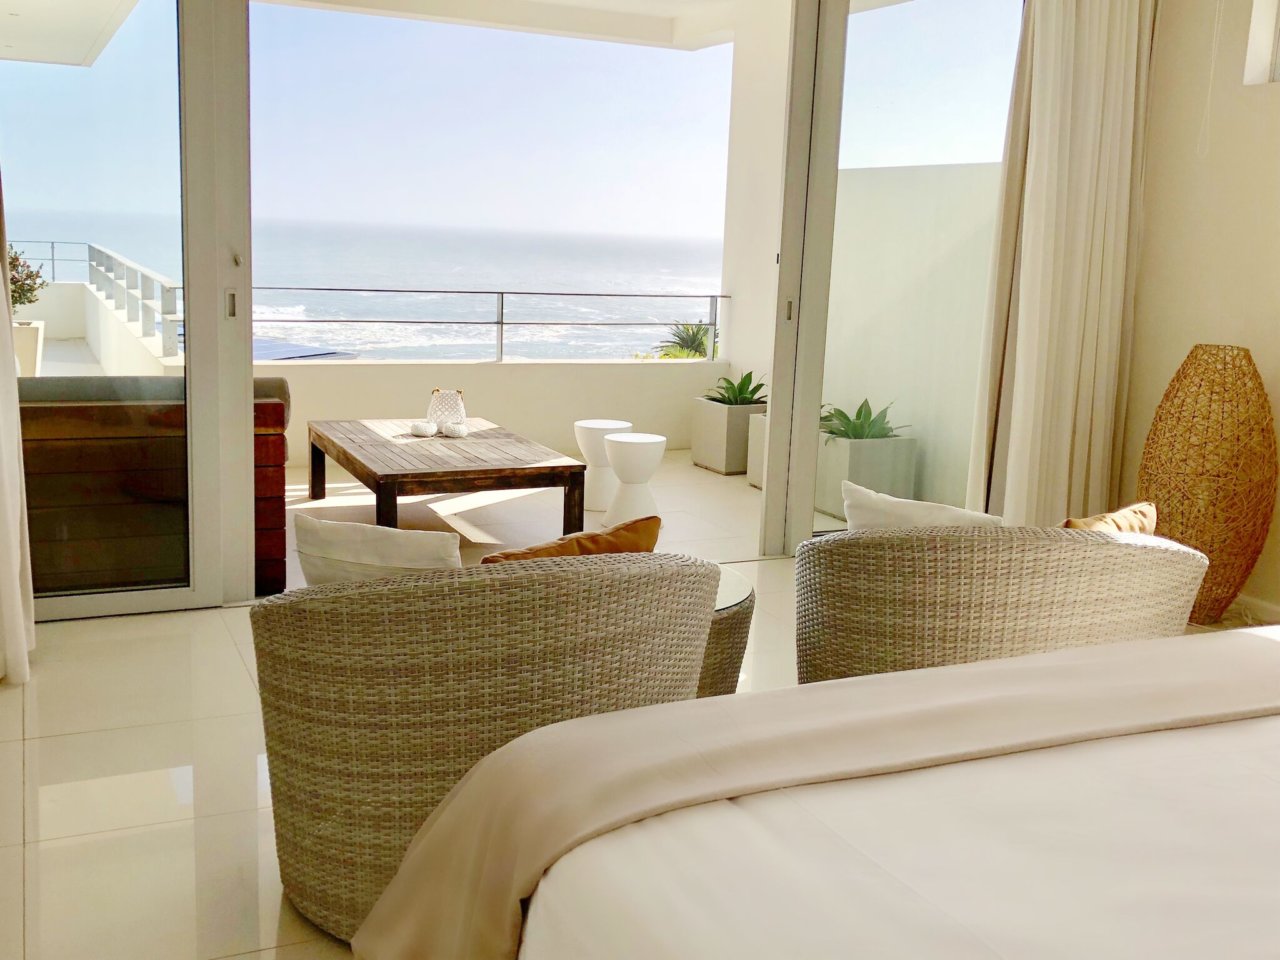 Photo 25 of Aqua House accommodation in Camps Bay, Cape Town with 3 bedrooms and 3 bathrooms